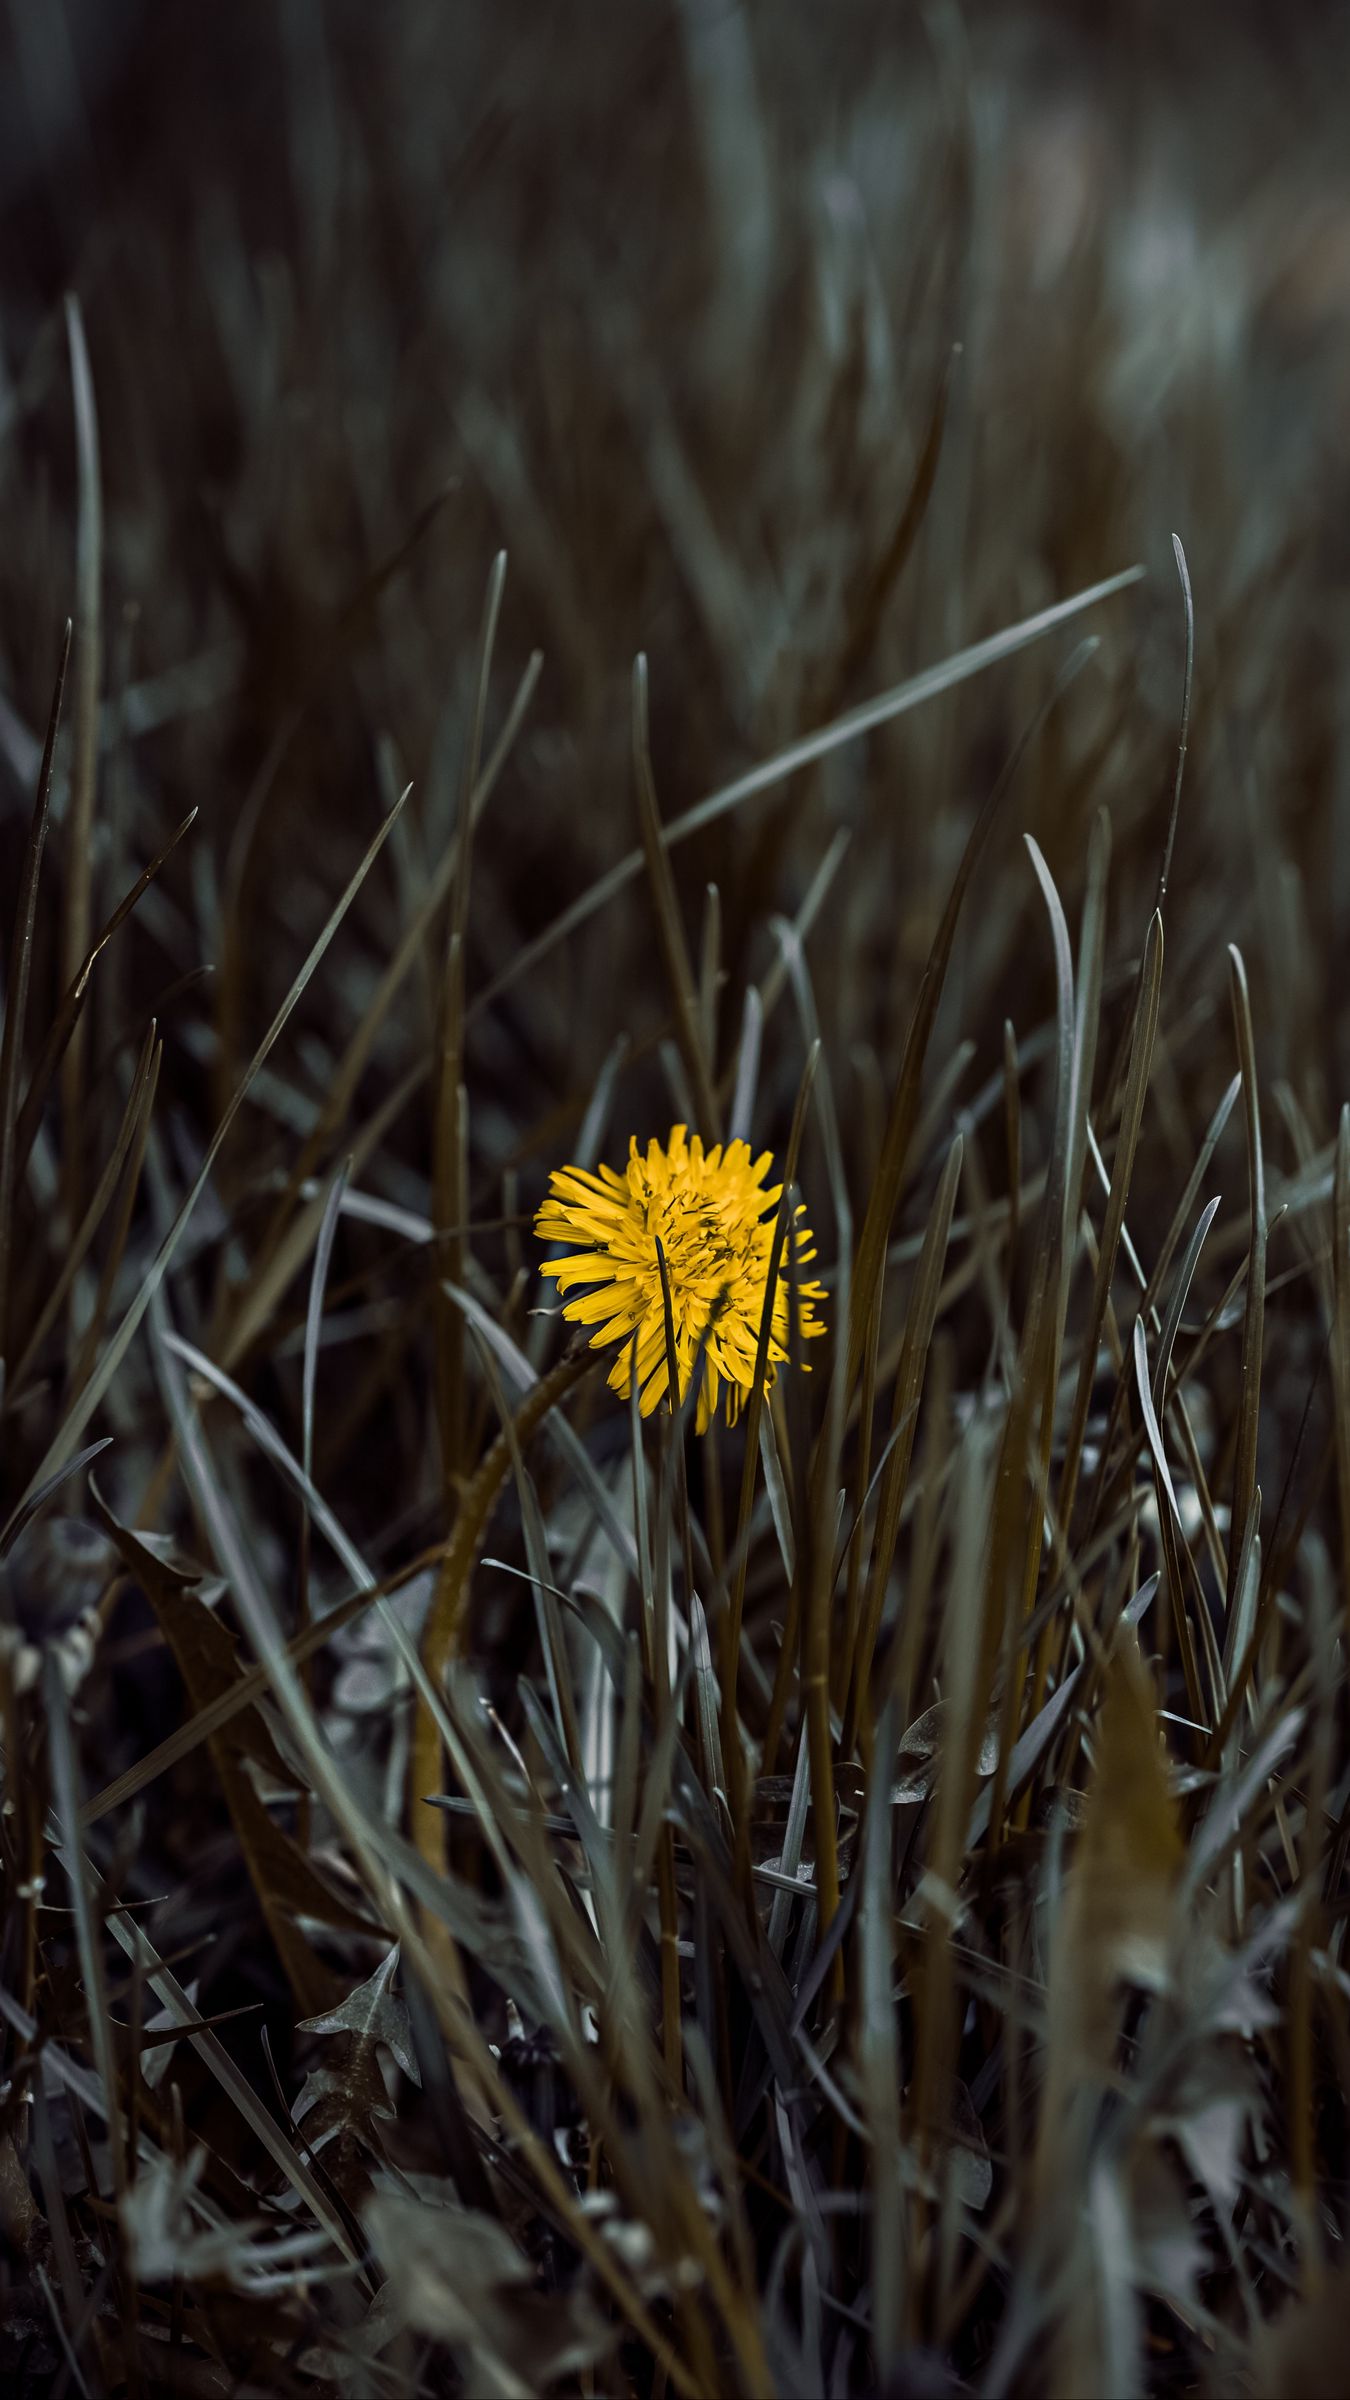 Download wallpaper 1350x2400 dandelion, flower, yellow iphone 8+/7+/6s+/for parallax HD background